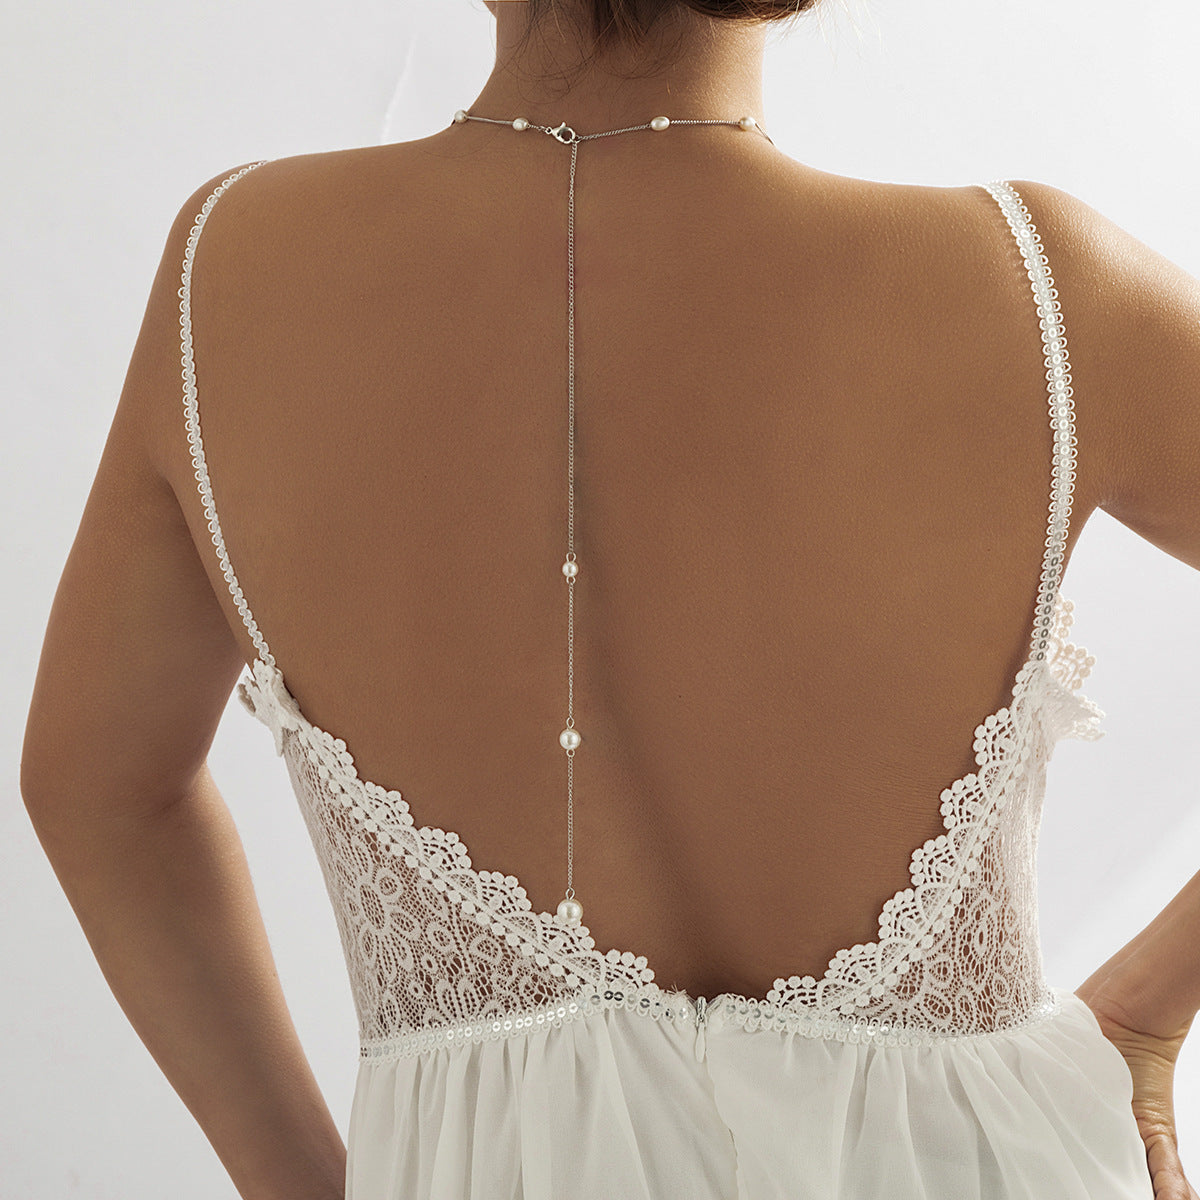 simple necklace bridal back body chain